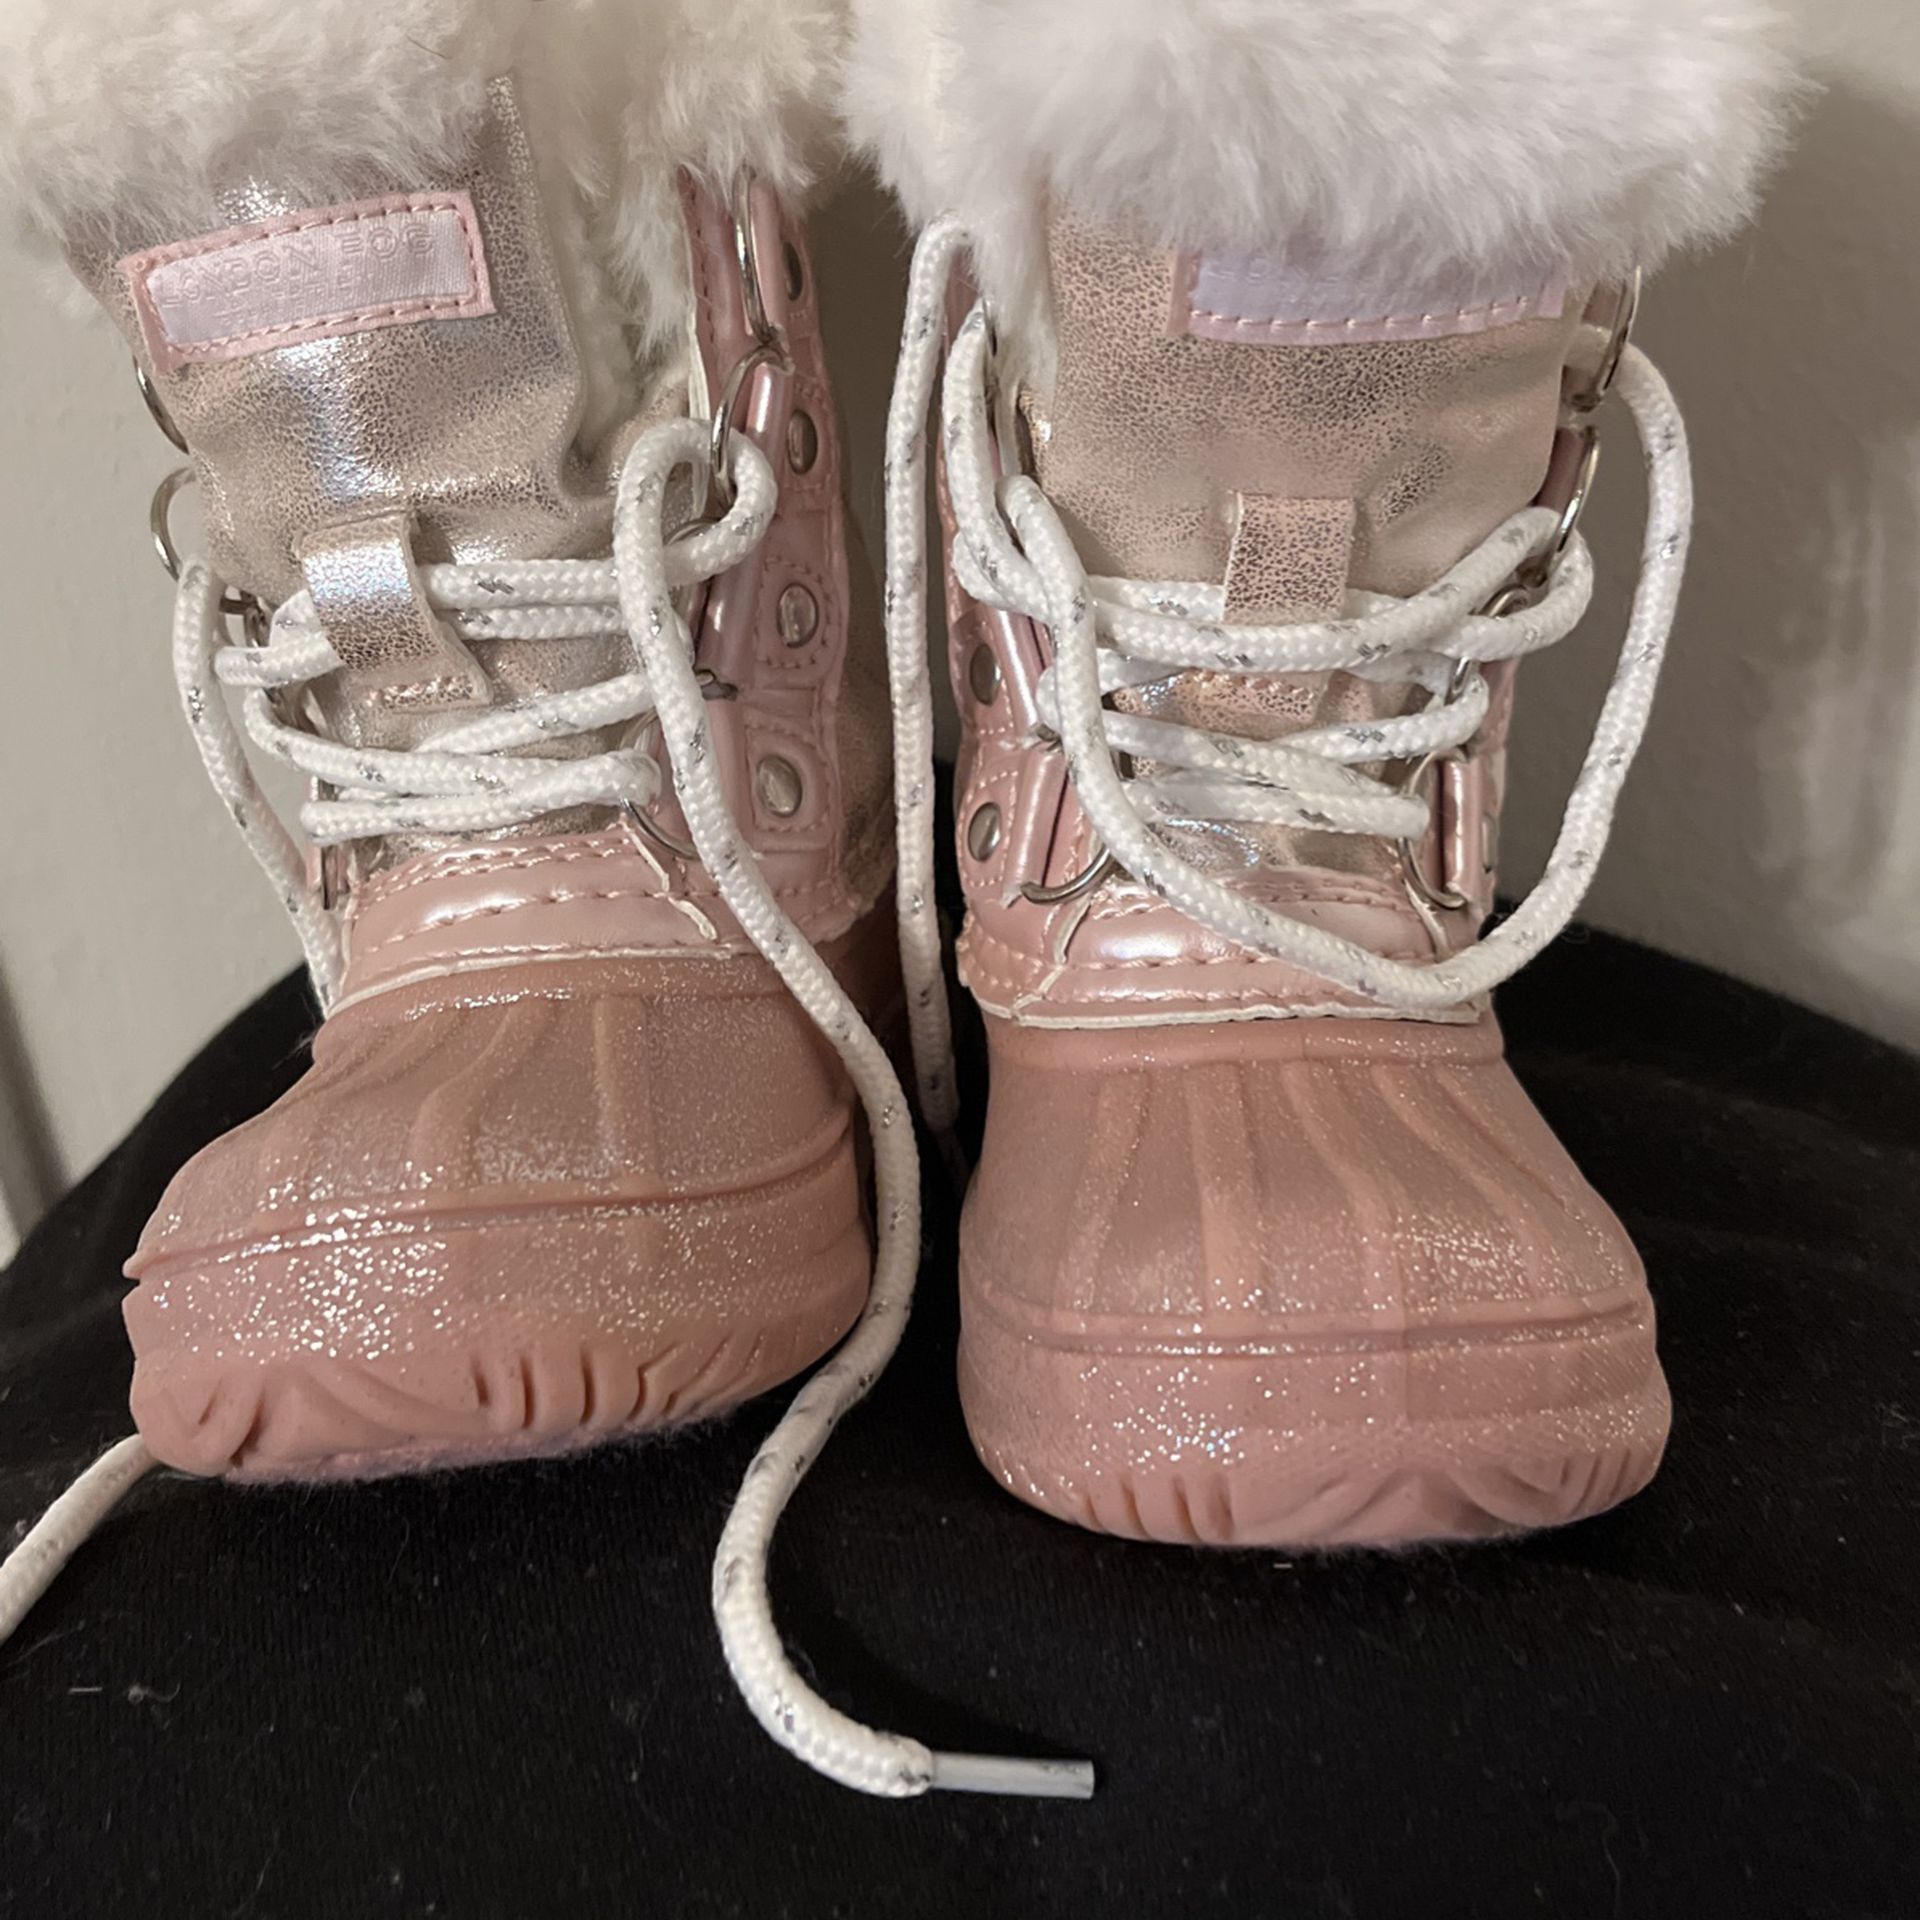 Toddler Snow Boots Size 6c 